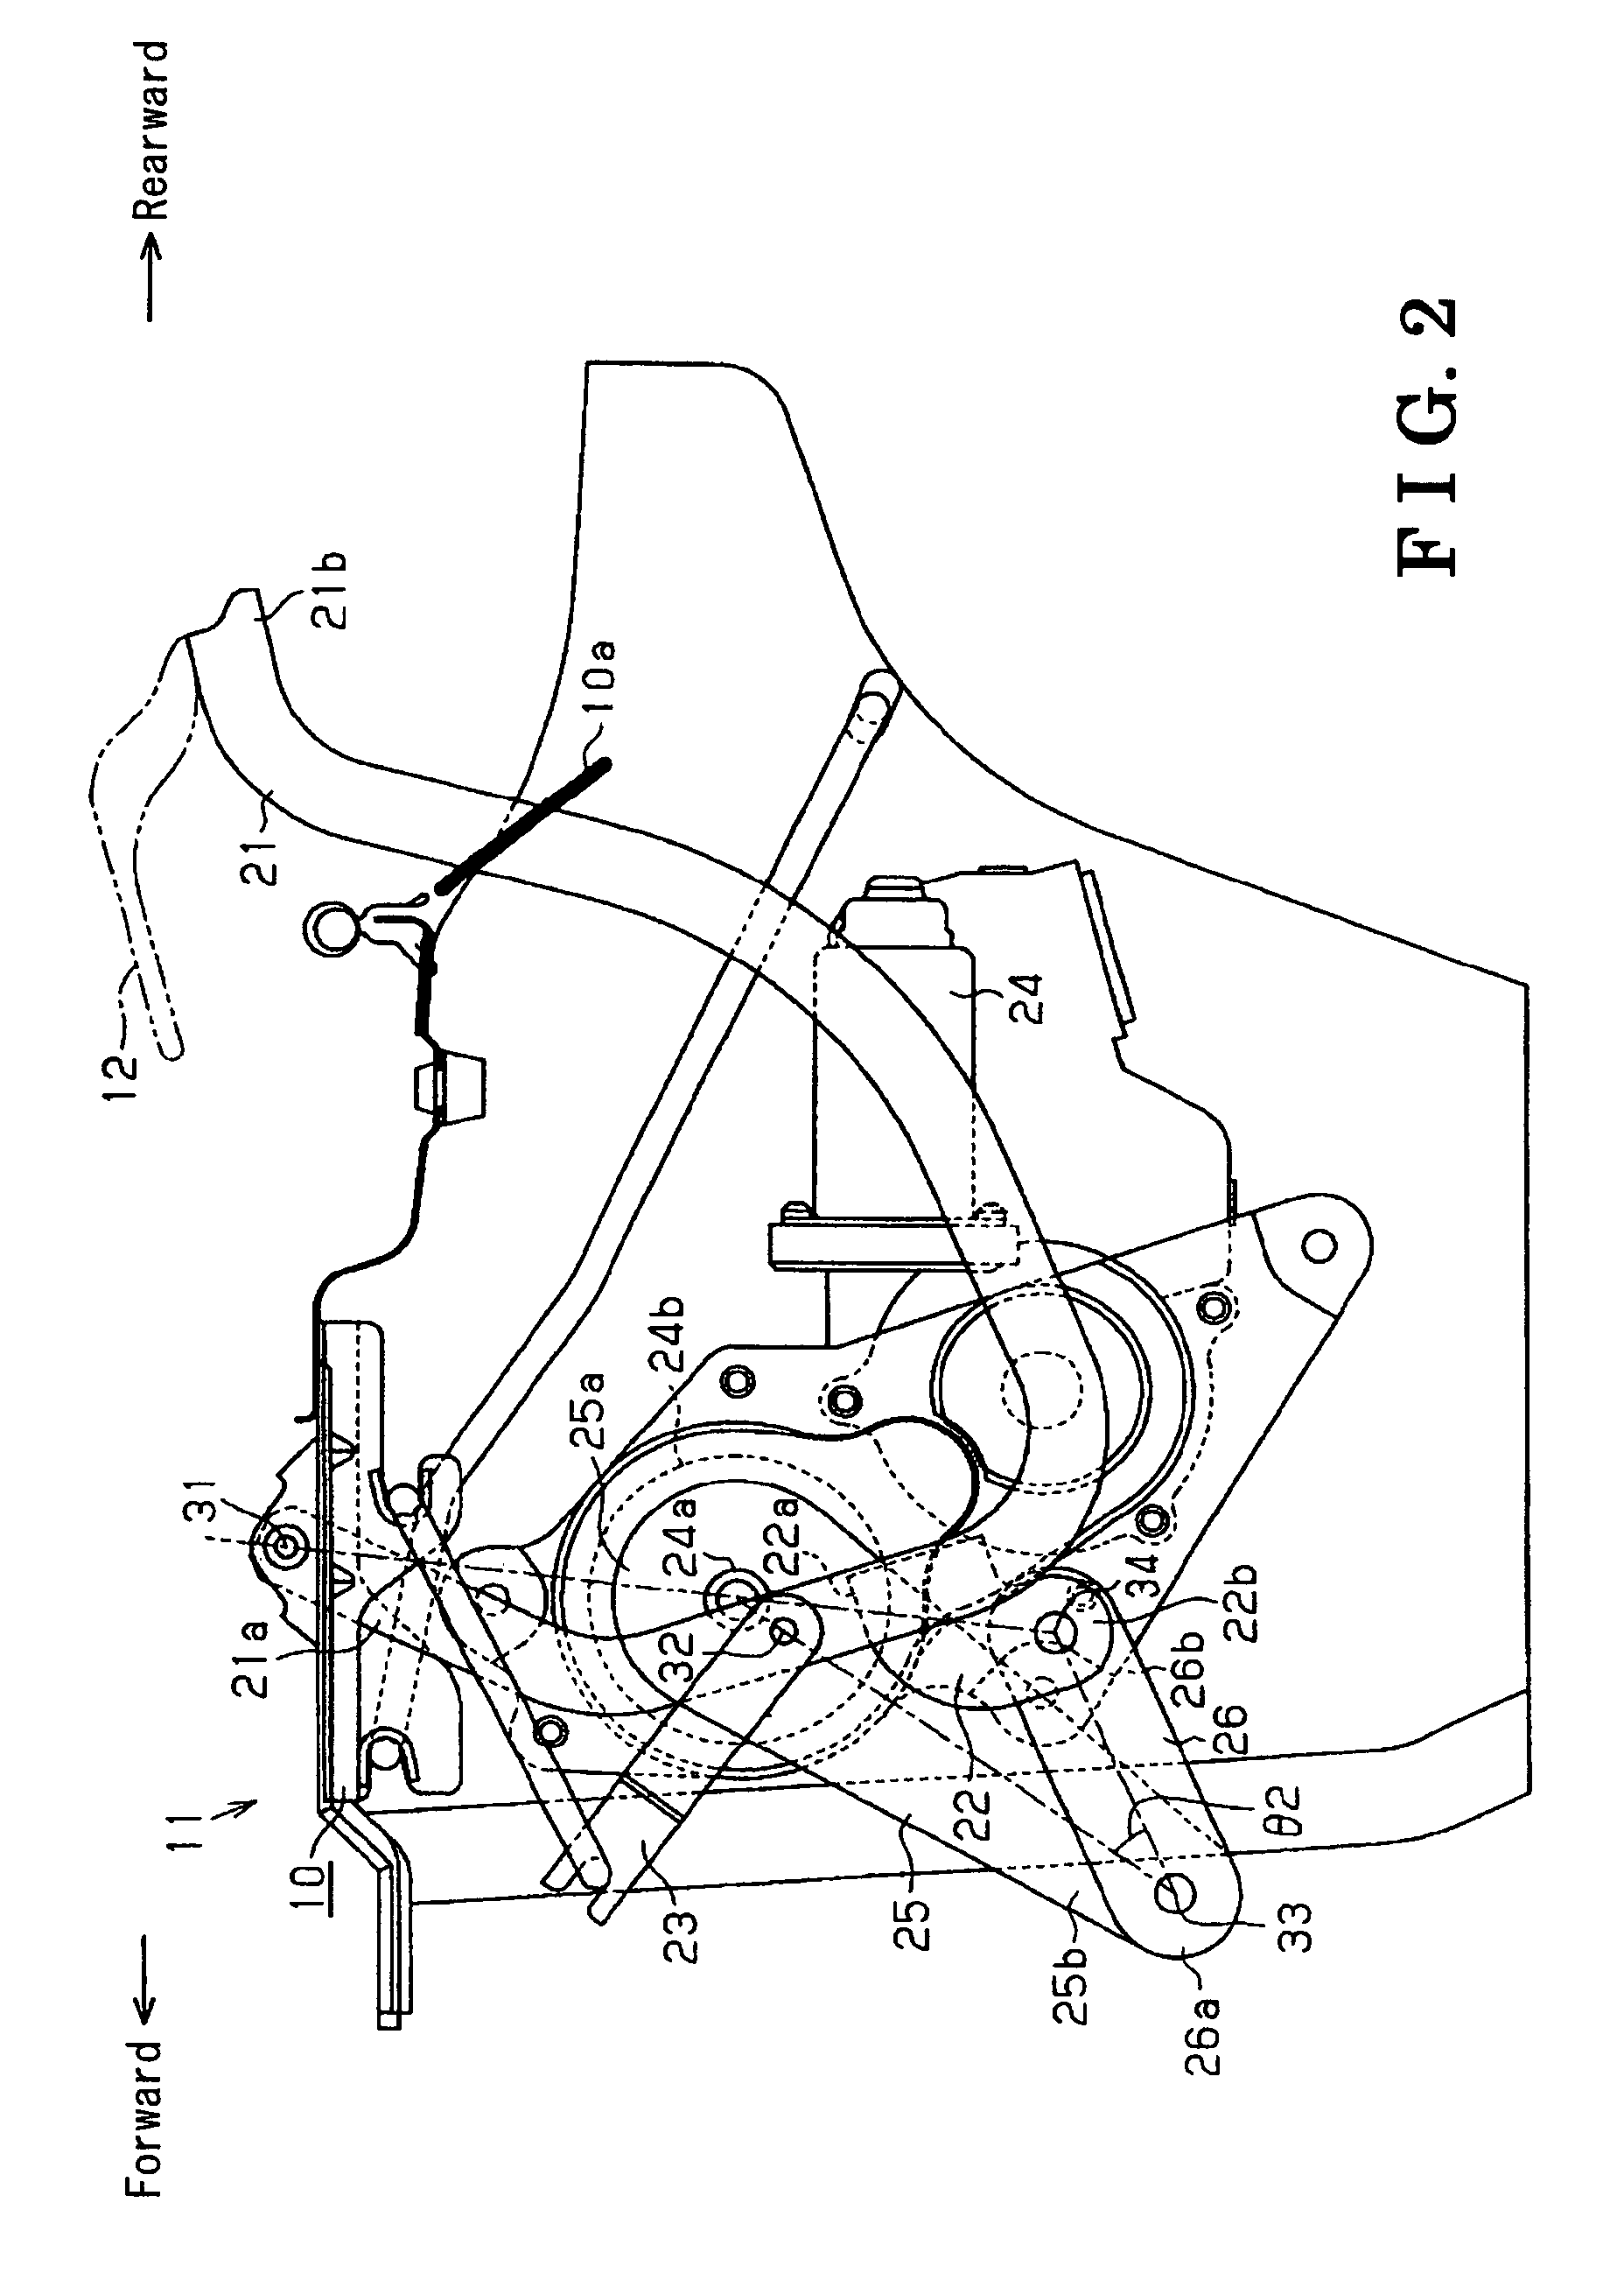 Opening and closing apparatus for a vehicle trunk lid